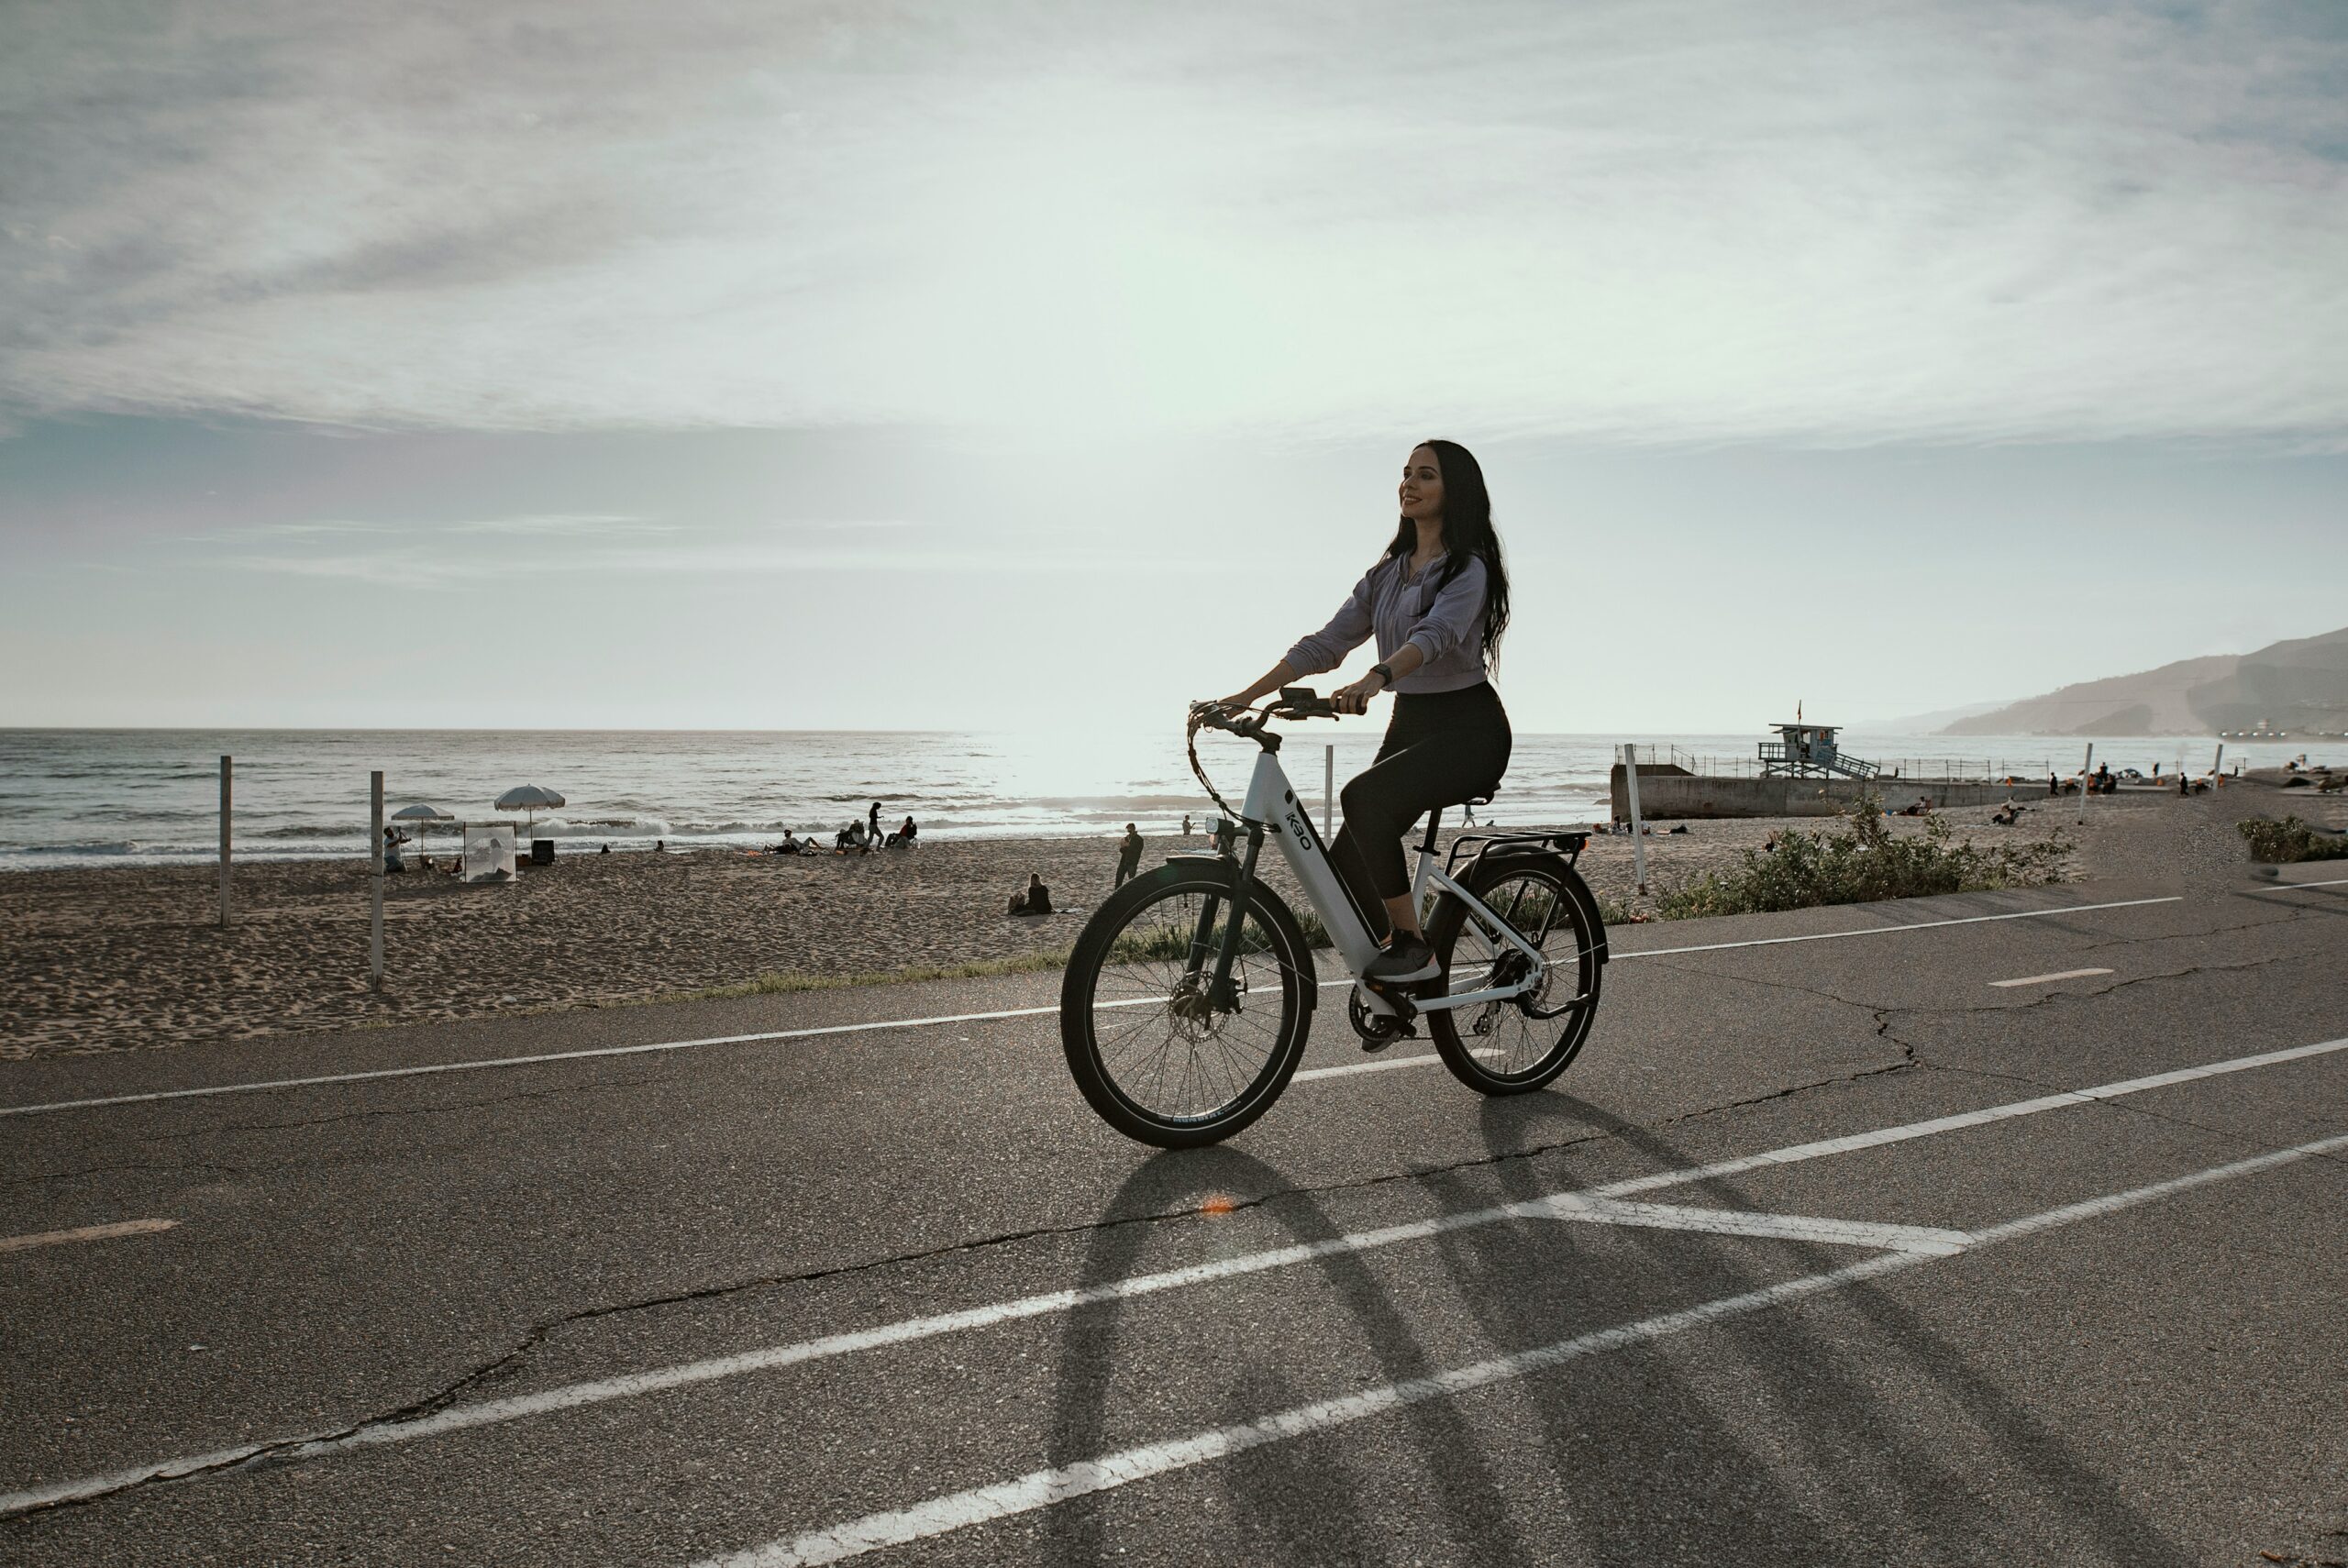 A woman rides an e-bike on a path next to the beach, with the sun behind her.